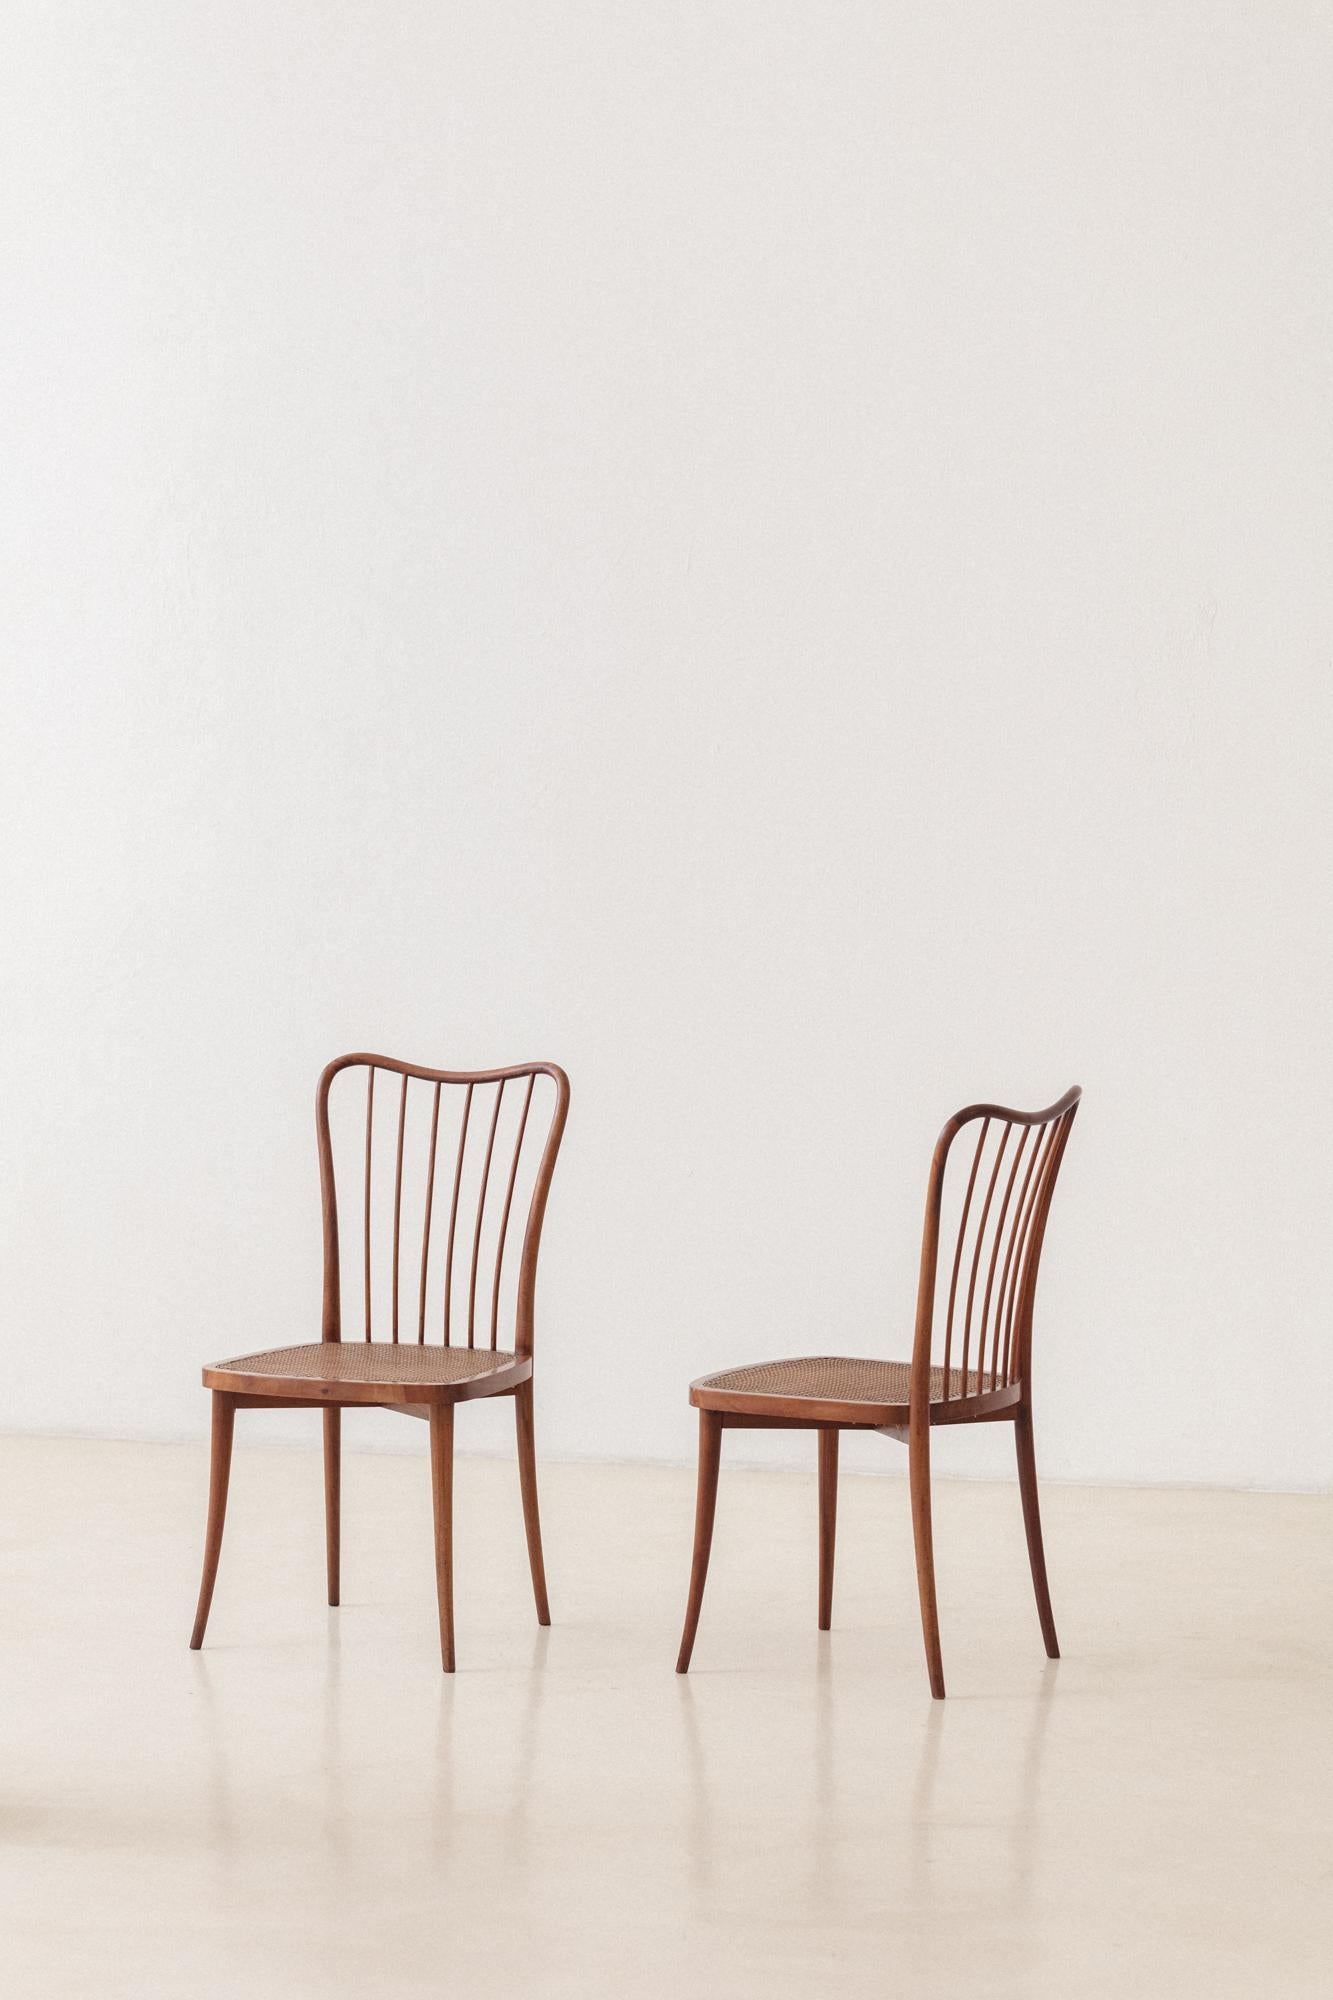 Brazilian Set of Eight Dining Chairs by Joaquim Tenreiro, Solid Wood and Cane, 1950s For Sale